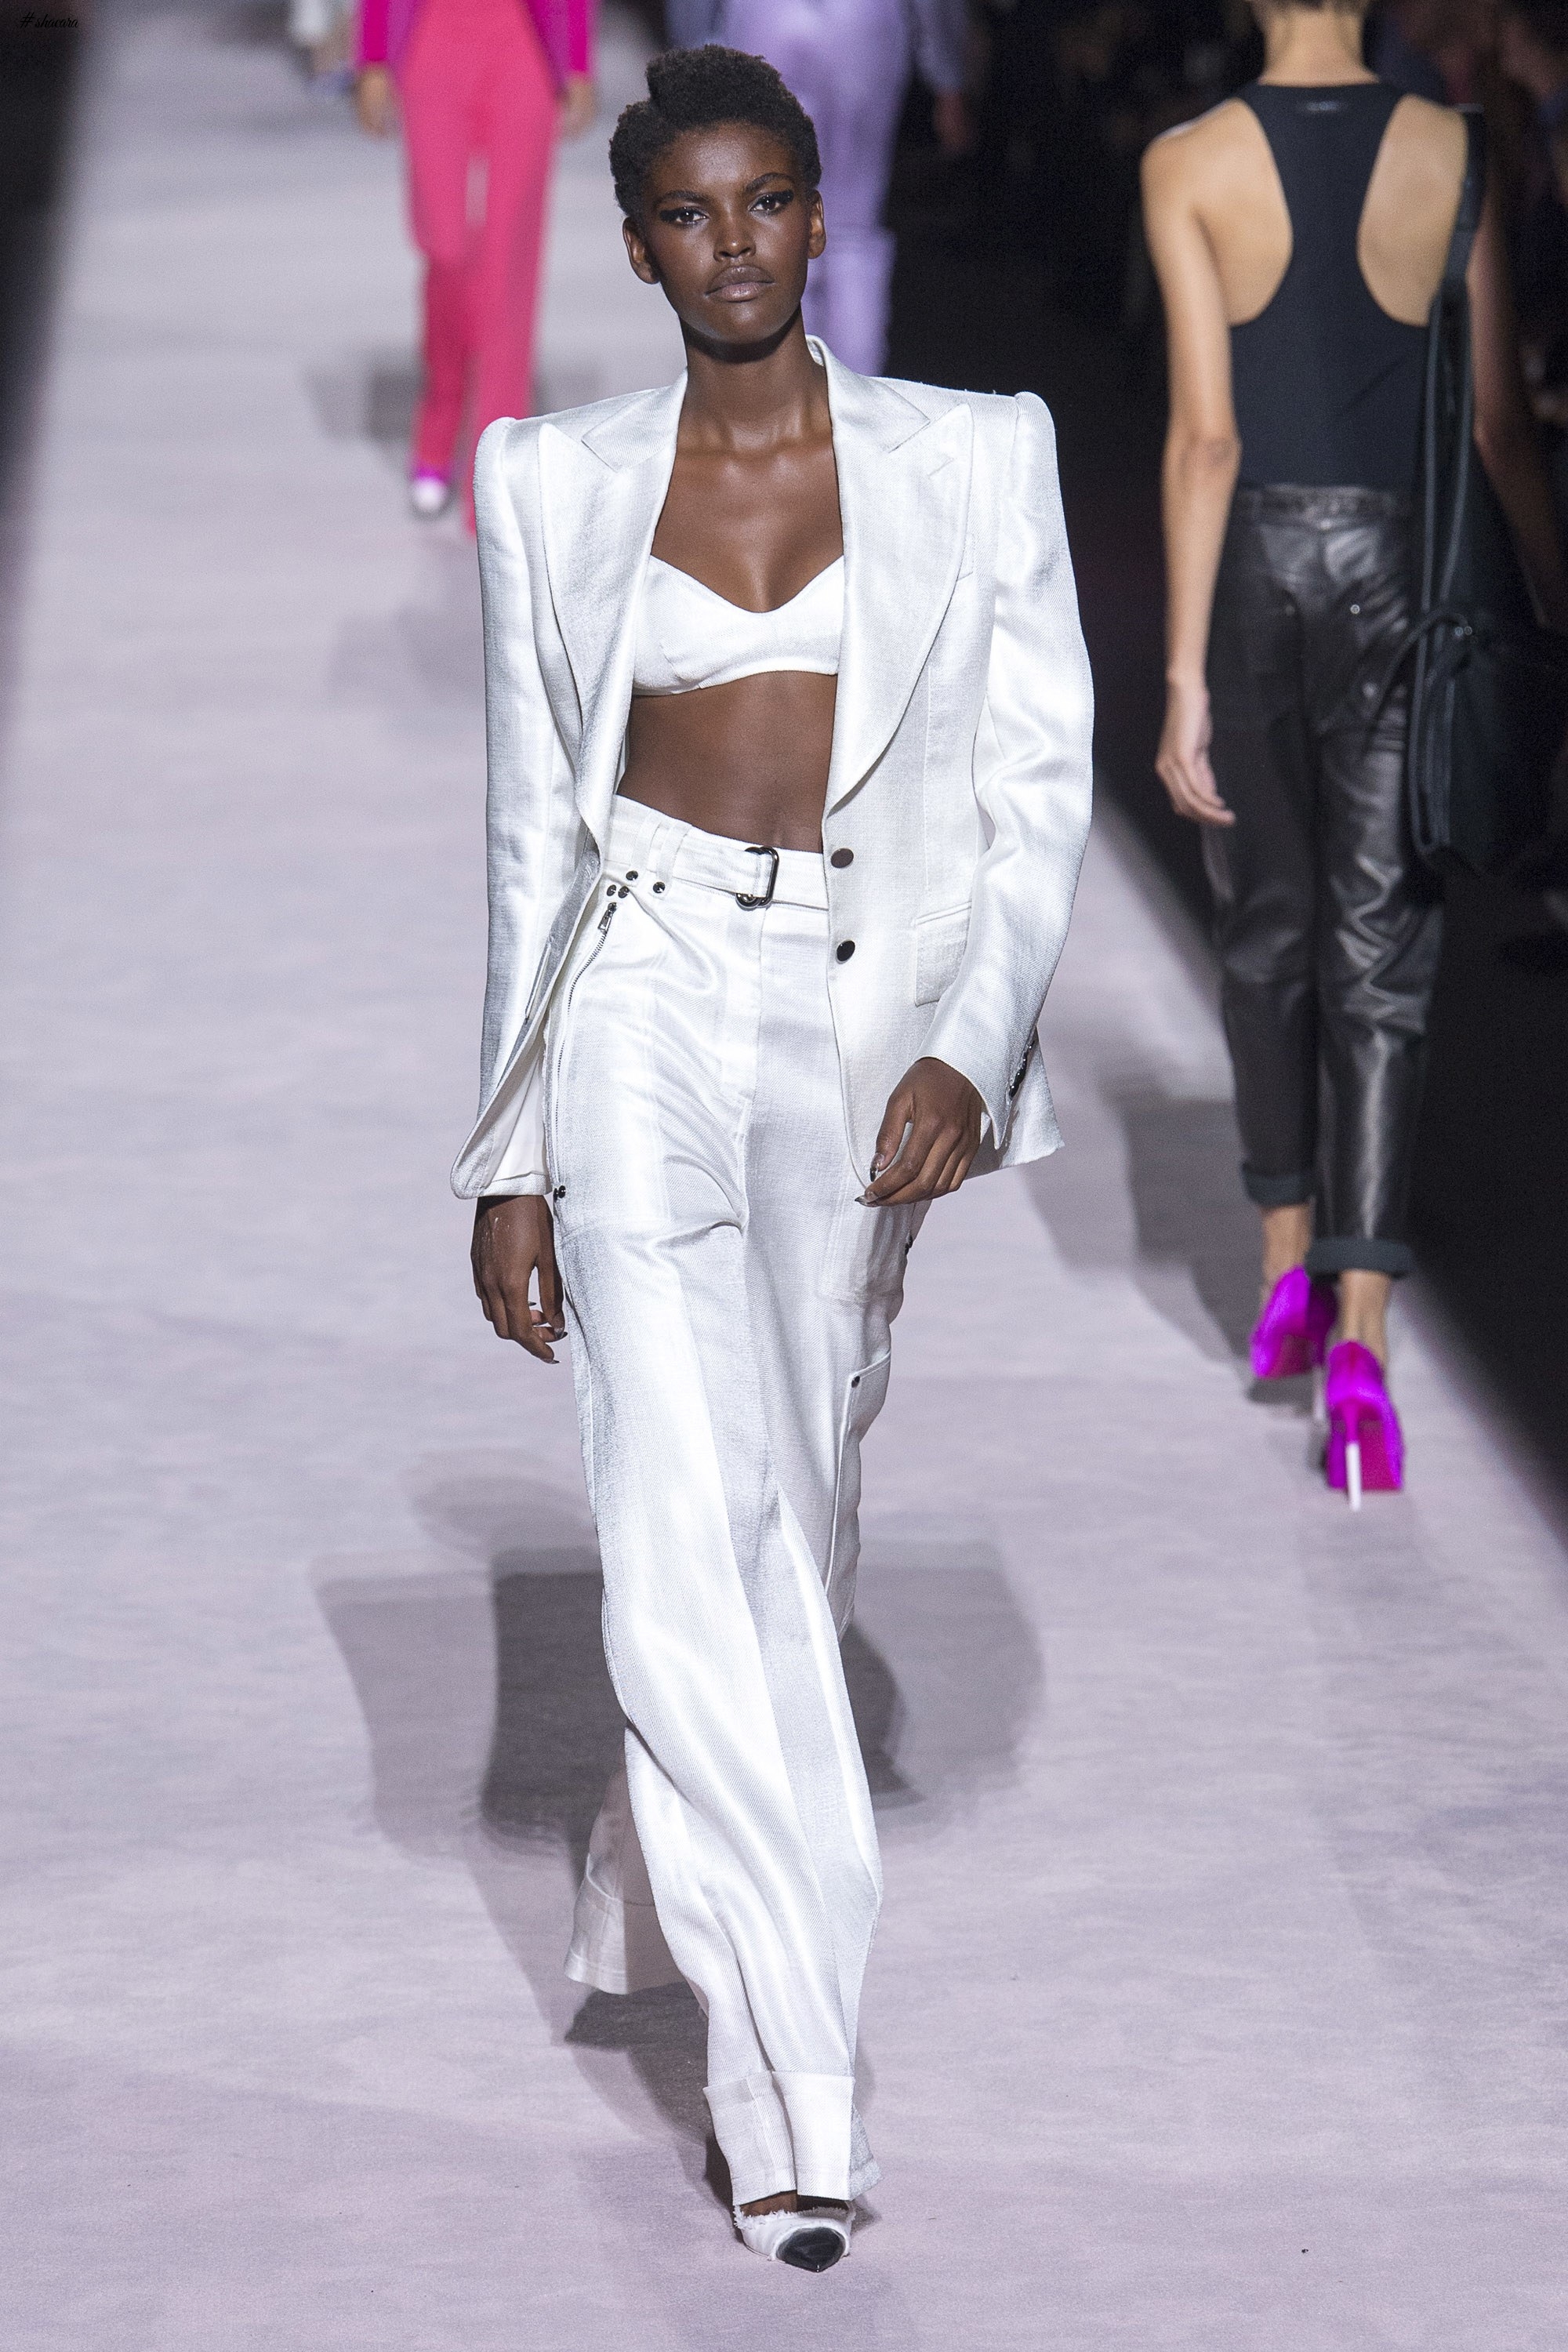 Tom Ford Takes Us To The ’90s With His SS/18 Collection At The #NYFWSS18